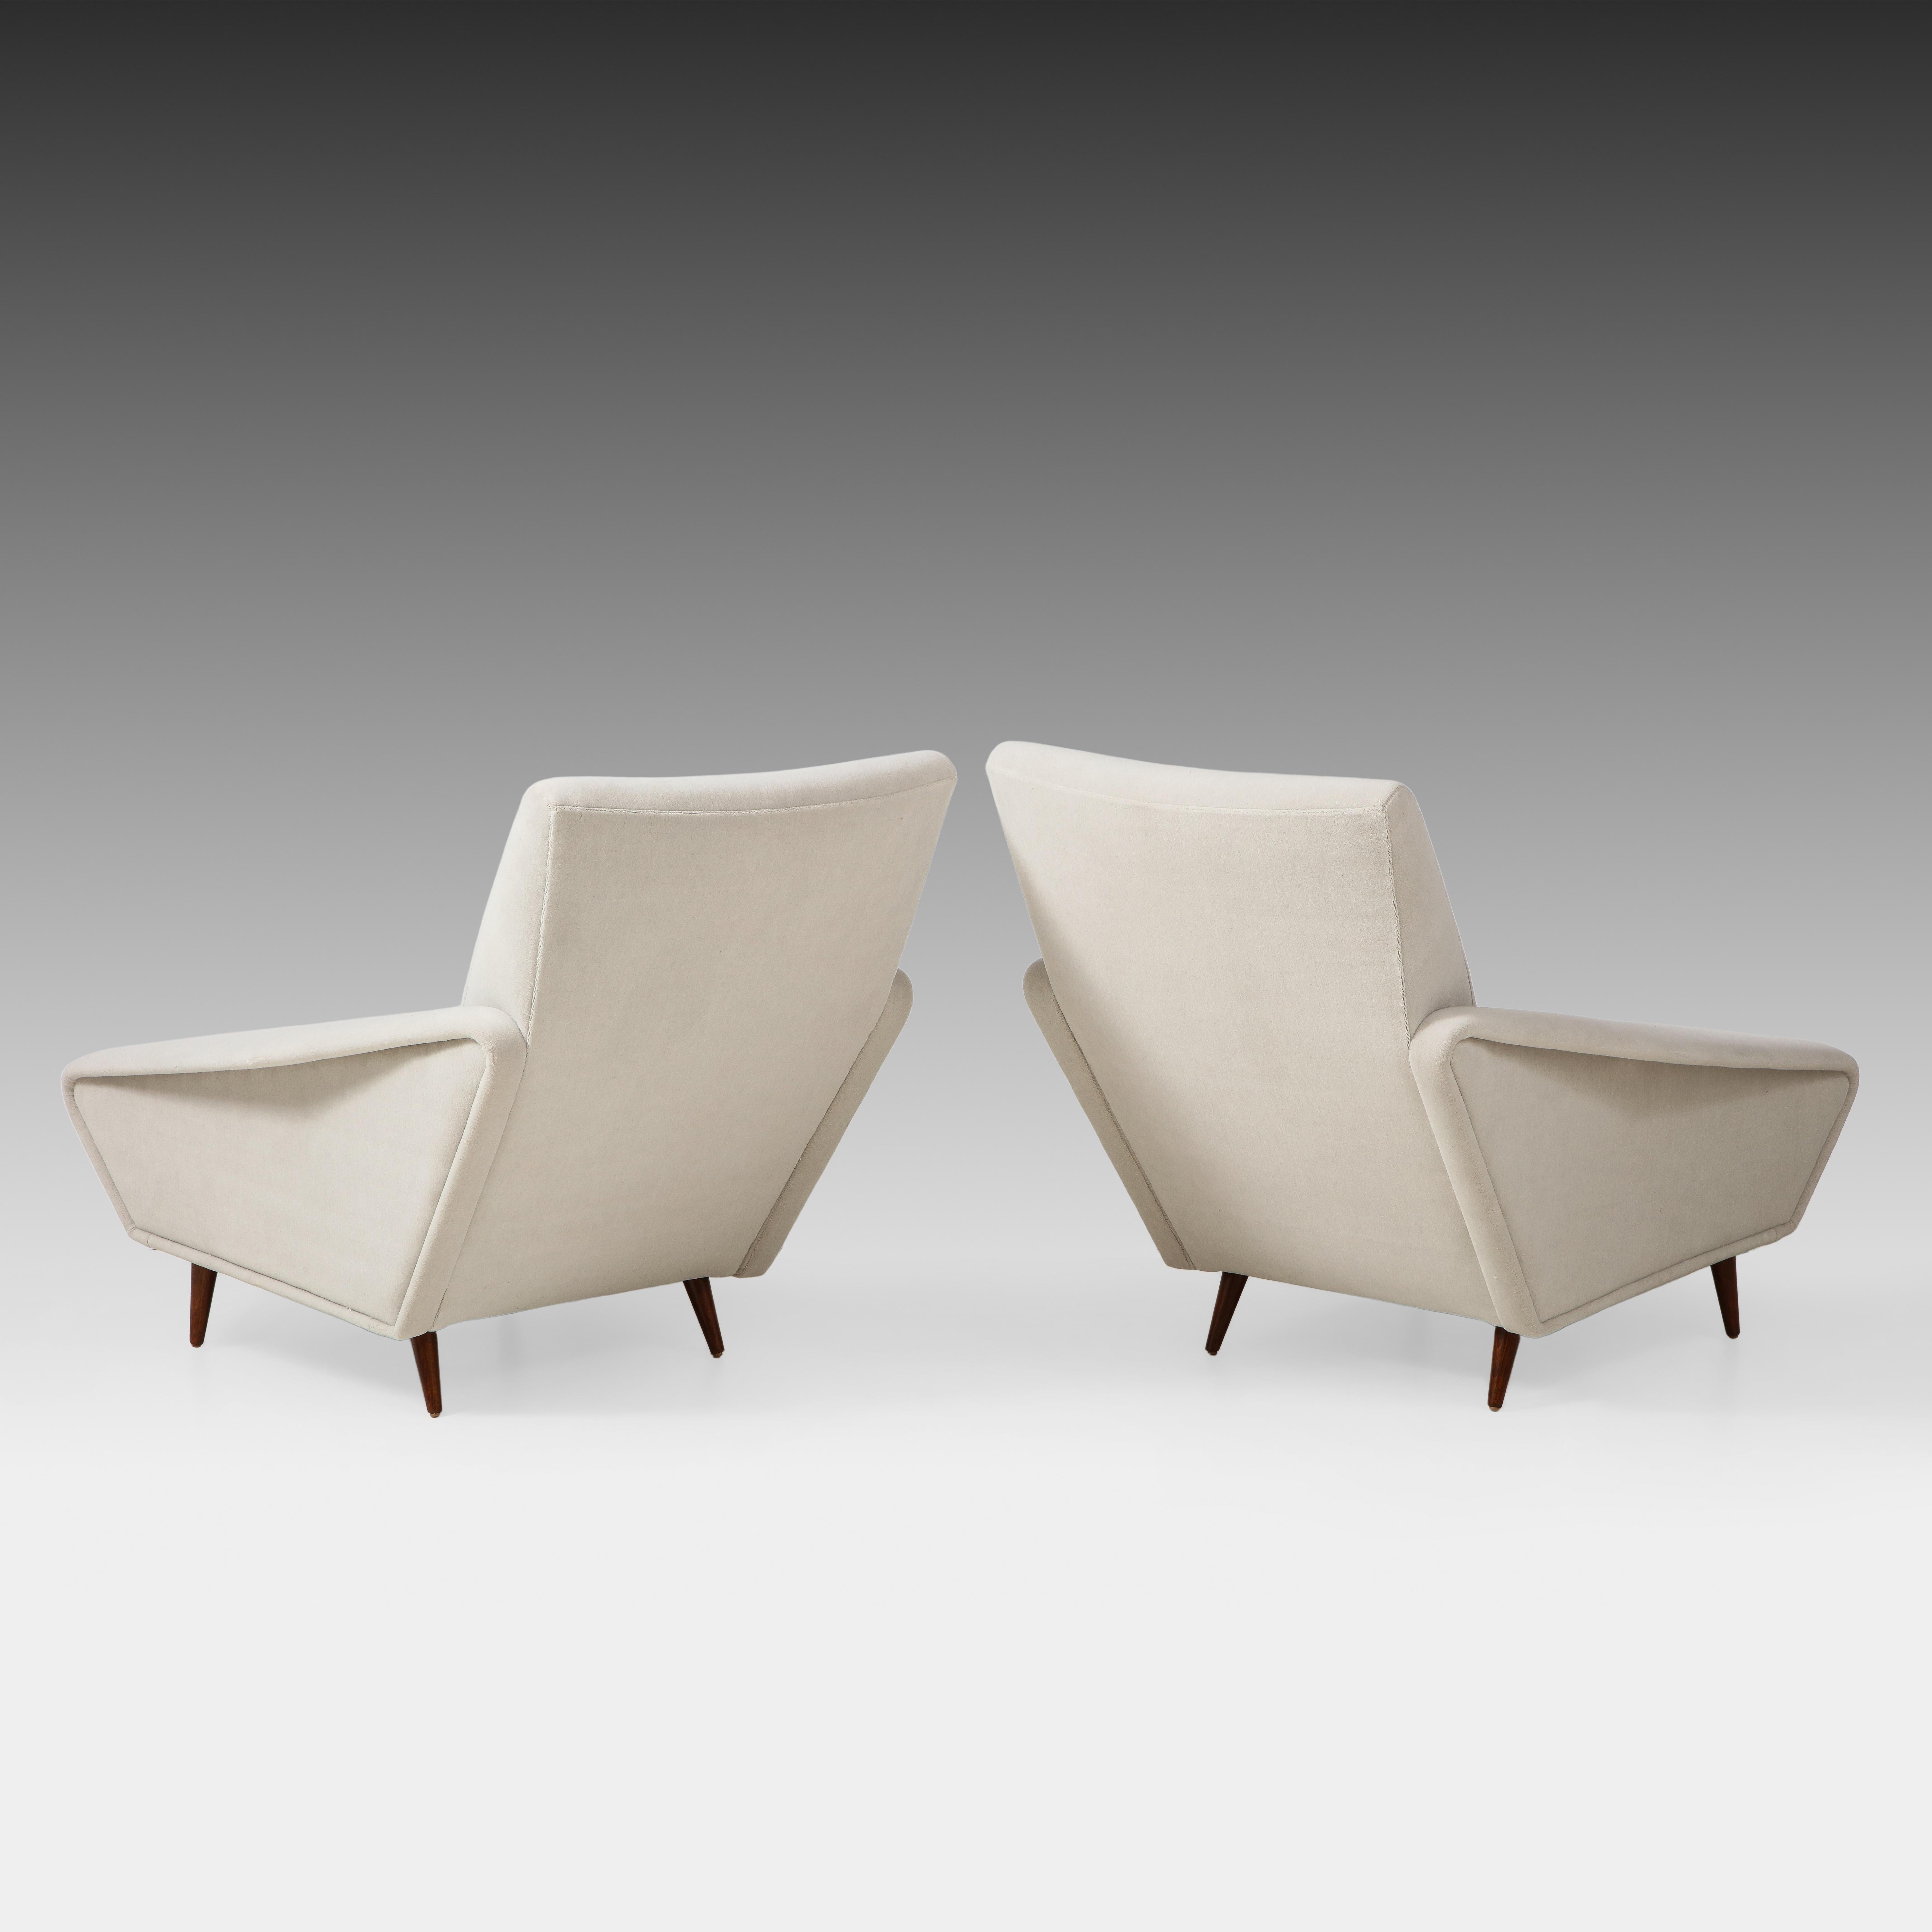 Mid-Century Modern Gio Ponti for Cassina Rare Pair of Distex Lounge Chairs Model 807 in Wool Velvet